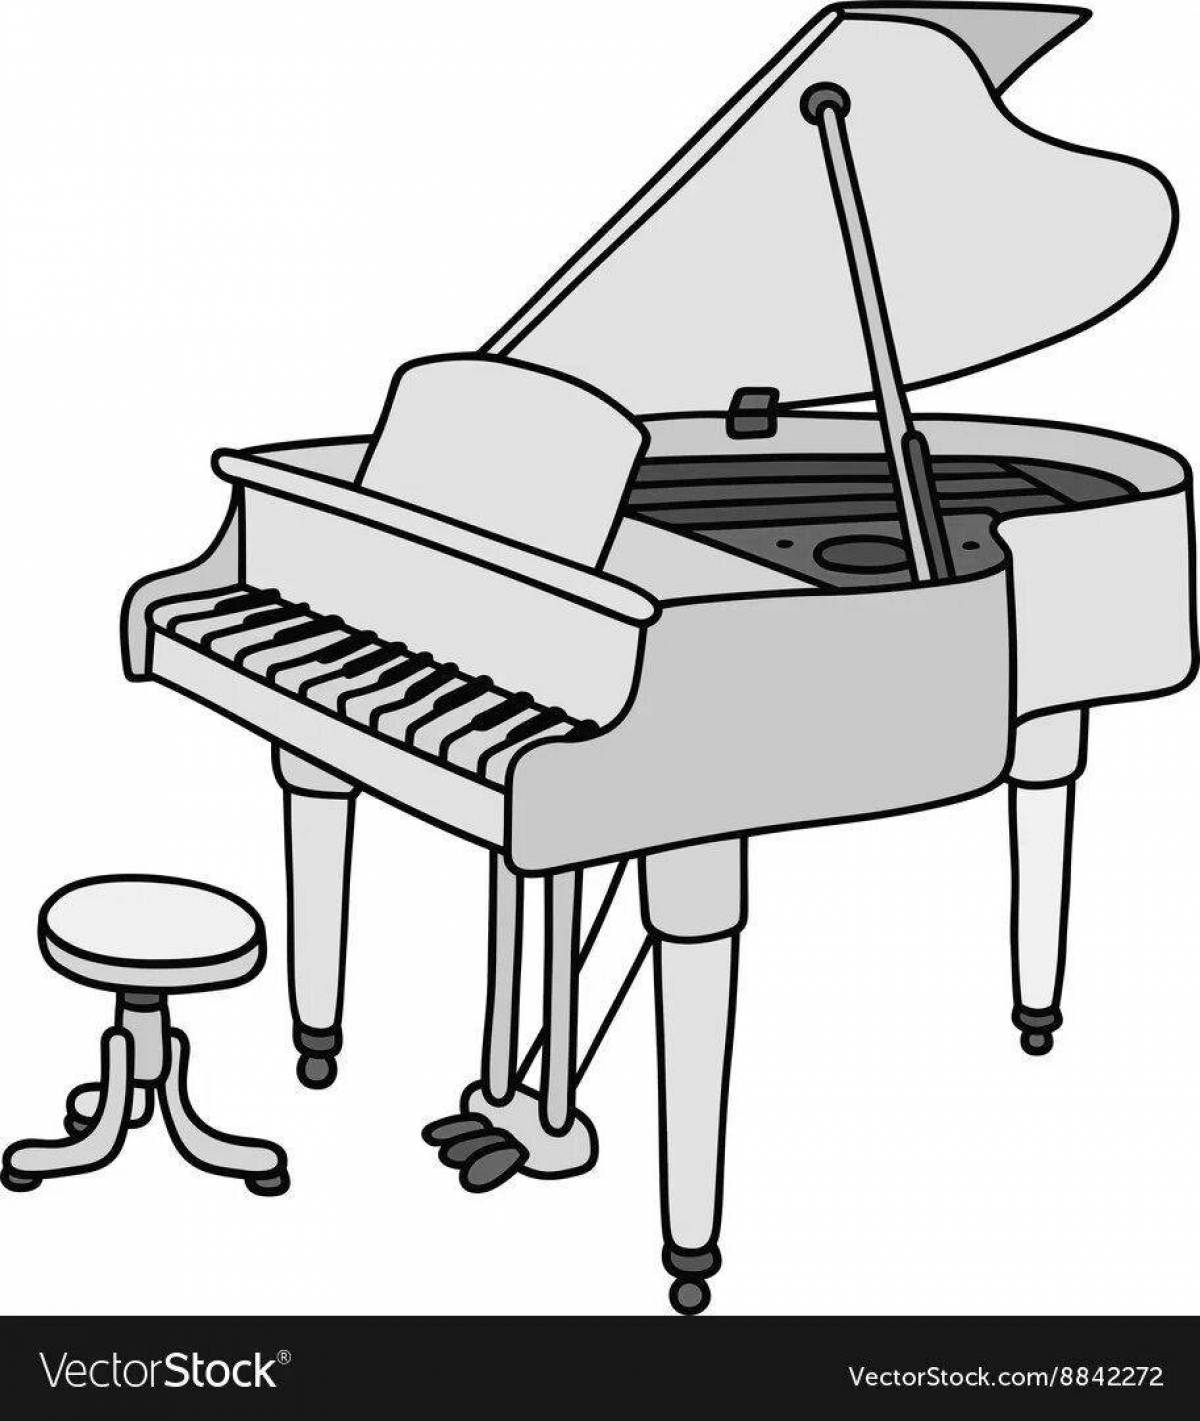 Fun piano coloring page for kids